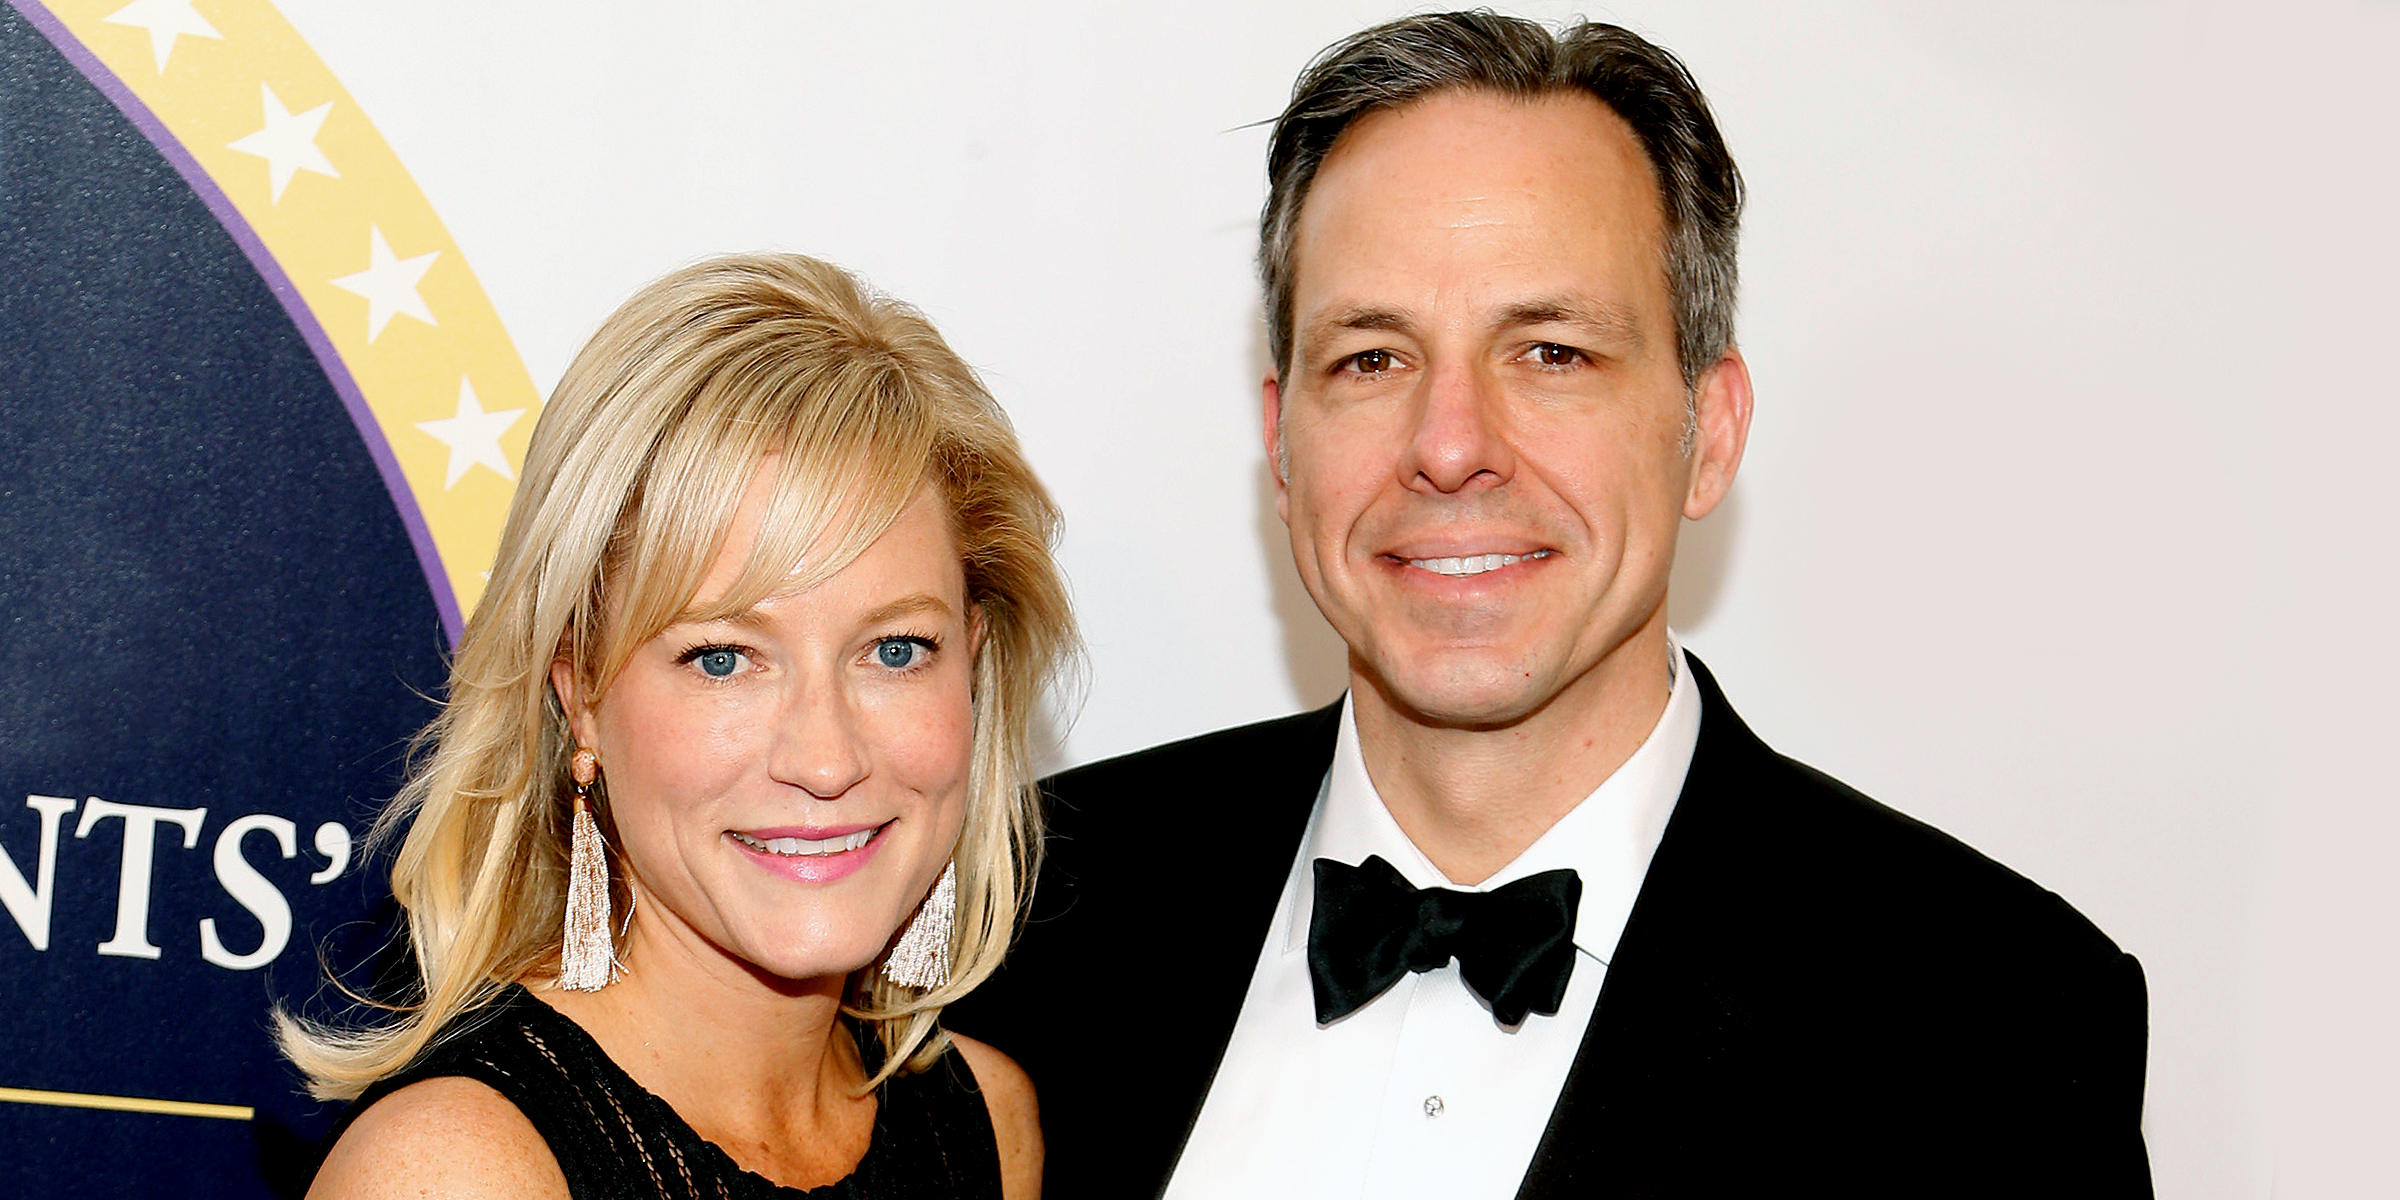 Jennifer Marie Brown and Jake Tapper | Source: Getty Images